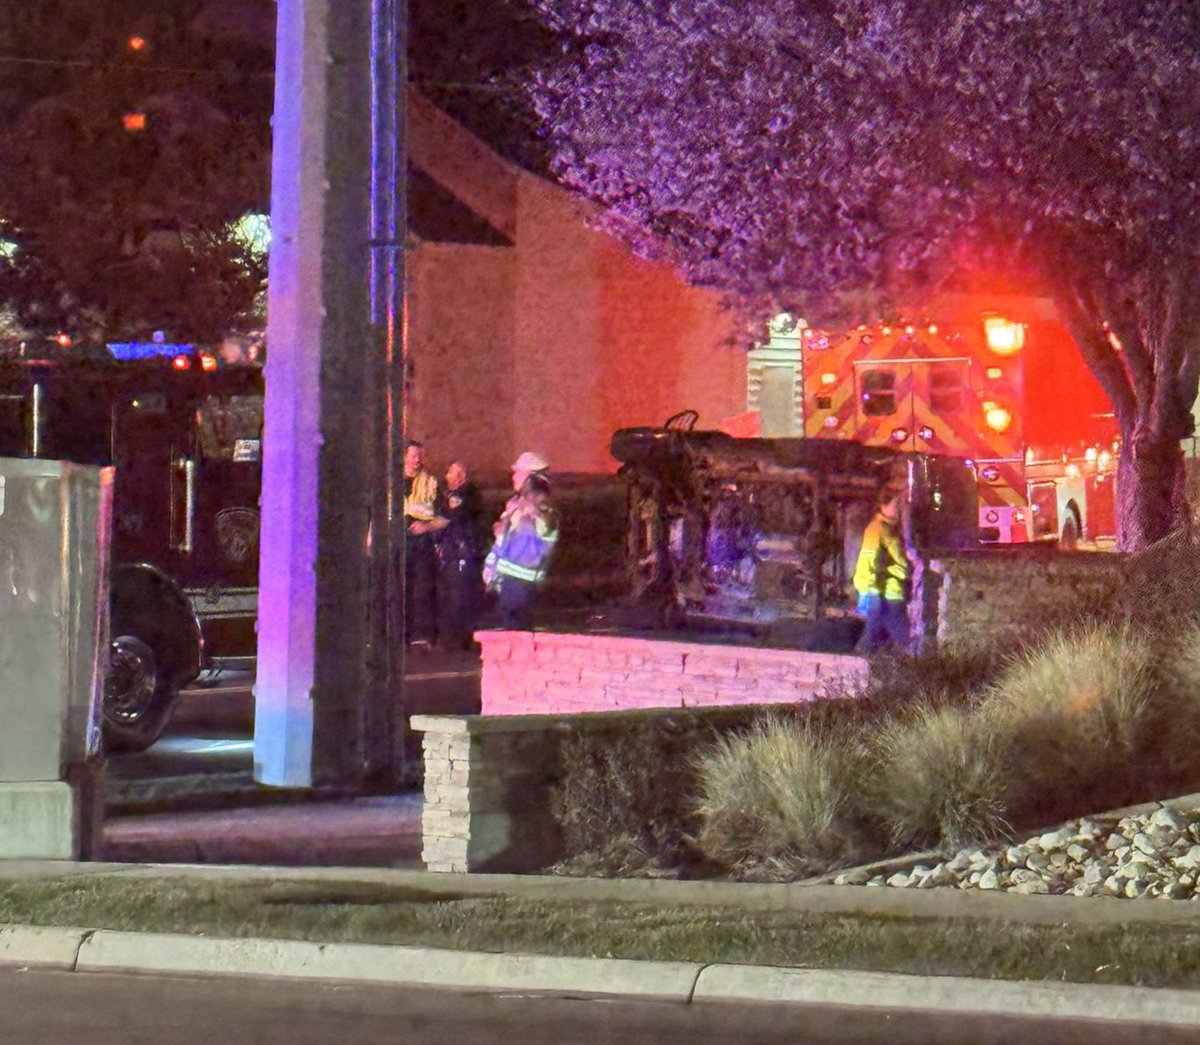 Taylorsville 5400 S 2700 W. Police and Fire just arrived on a crash. 2 vehicles involved and reports of 3 people stuck in a SUV. Unknown extent of injuries 